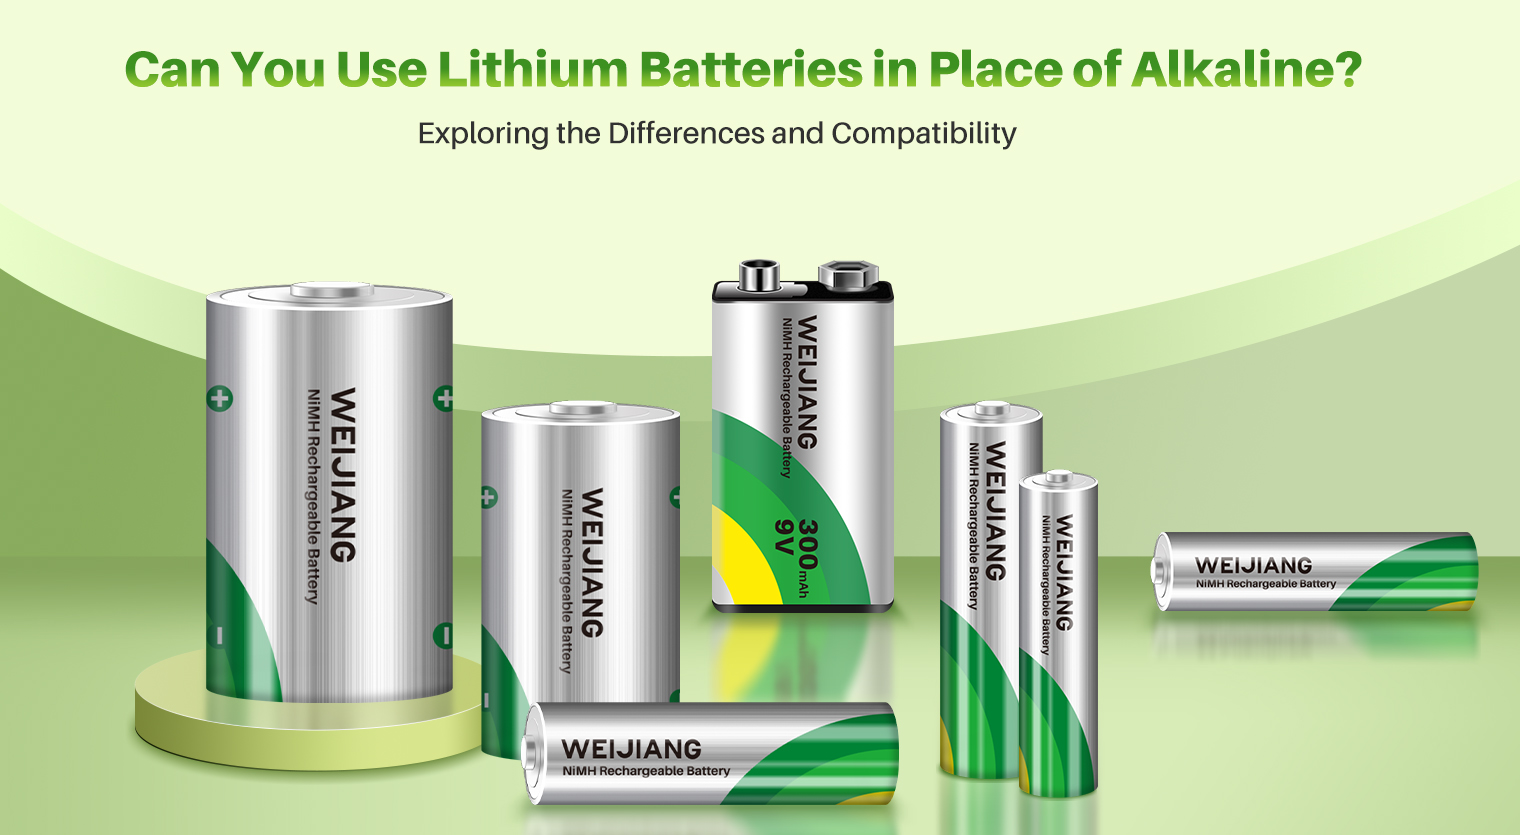 Can You Use Lithium Batteries in Place of Alkaline? Exploring the Differences and Compatibility | WEIJIANG